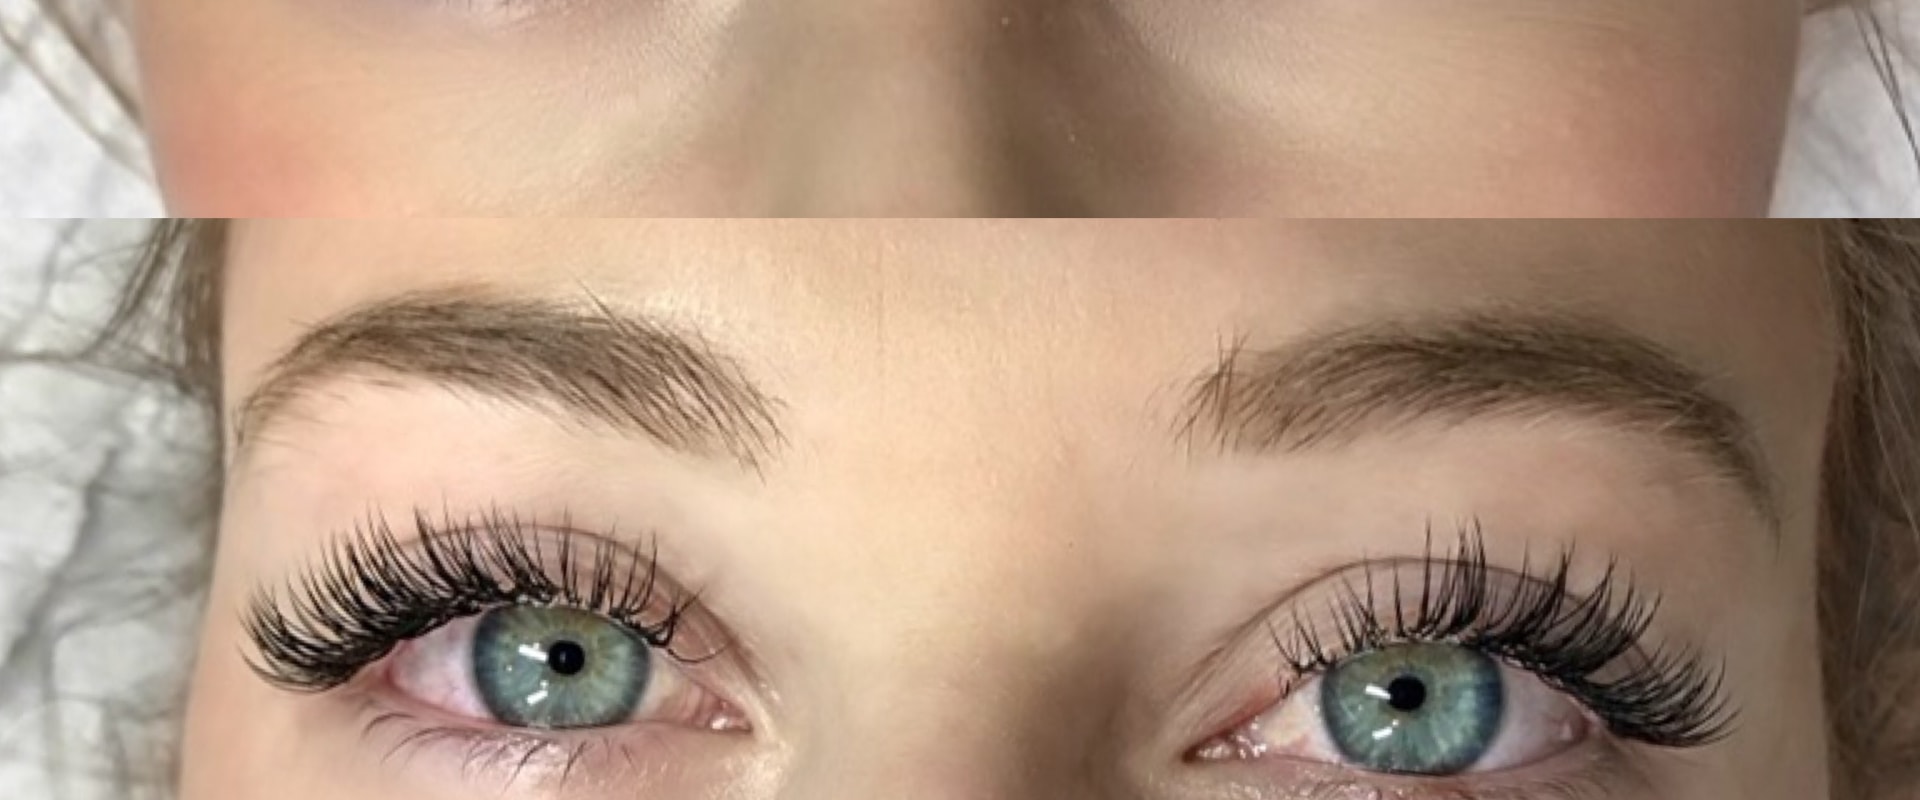 How long do permanent lashes last?